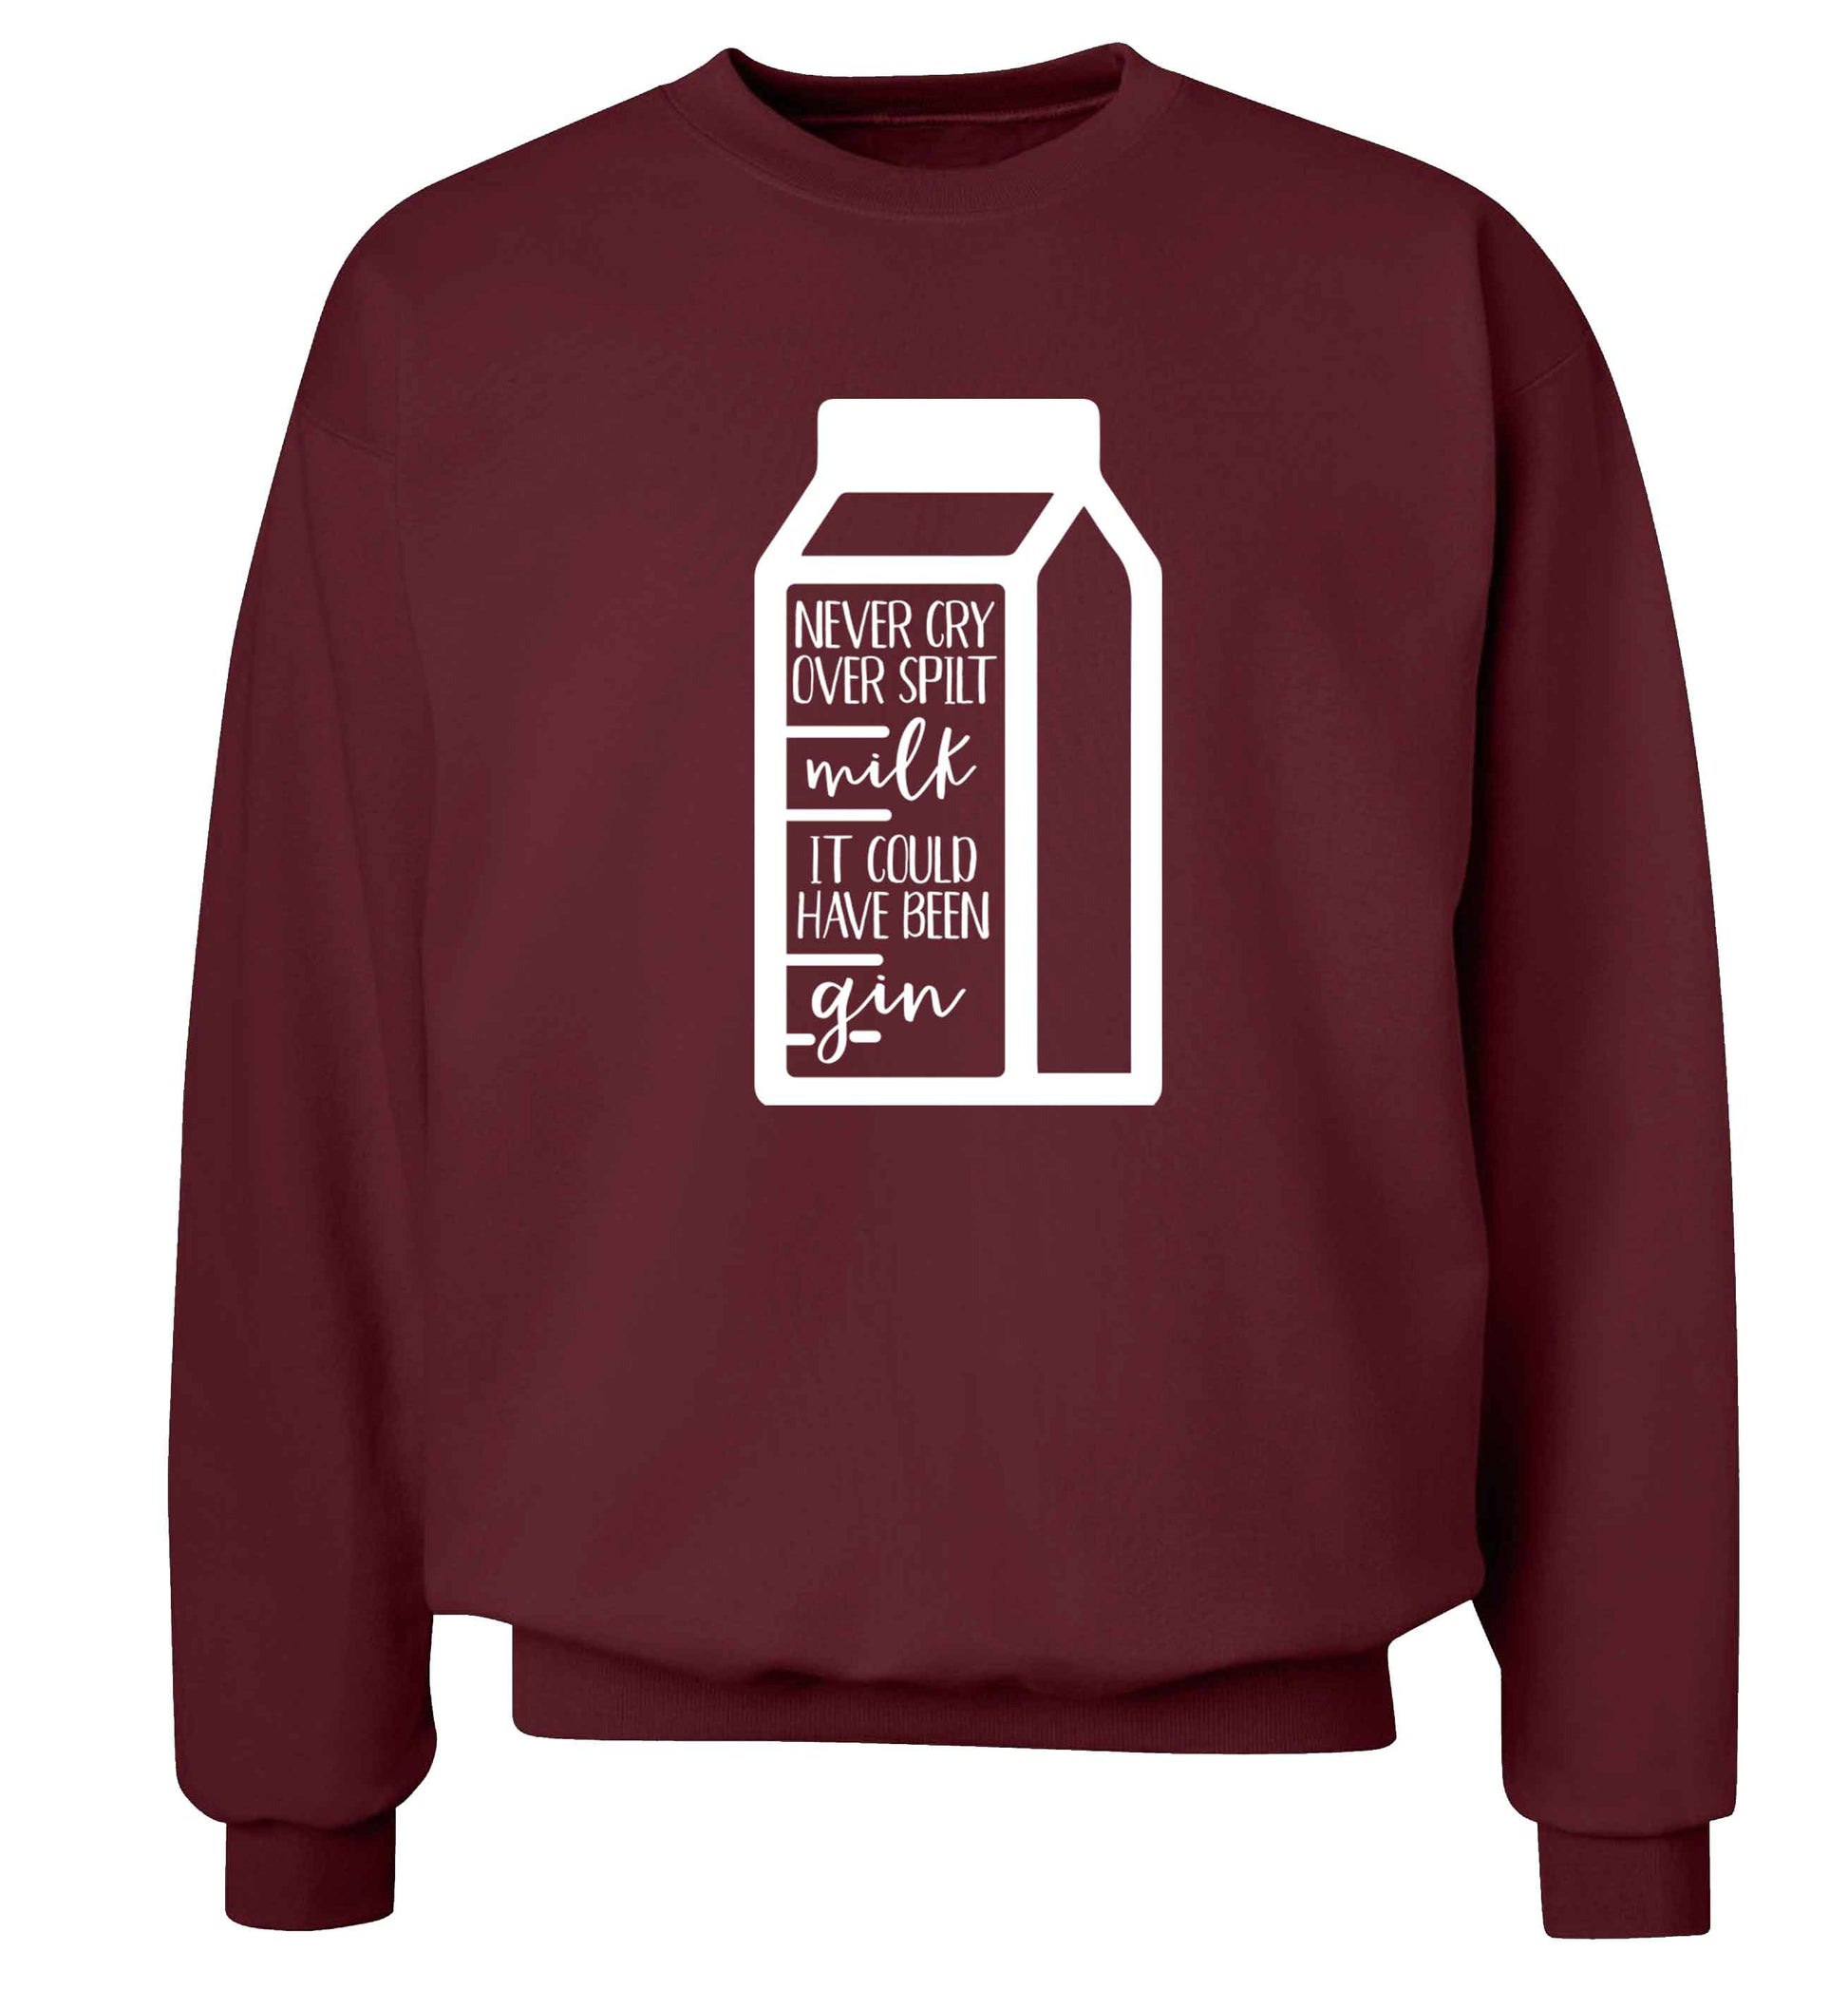 Never cry over spilt milk, it could have been gin Adult's unisex maroon Sweater 2XL